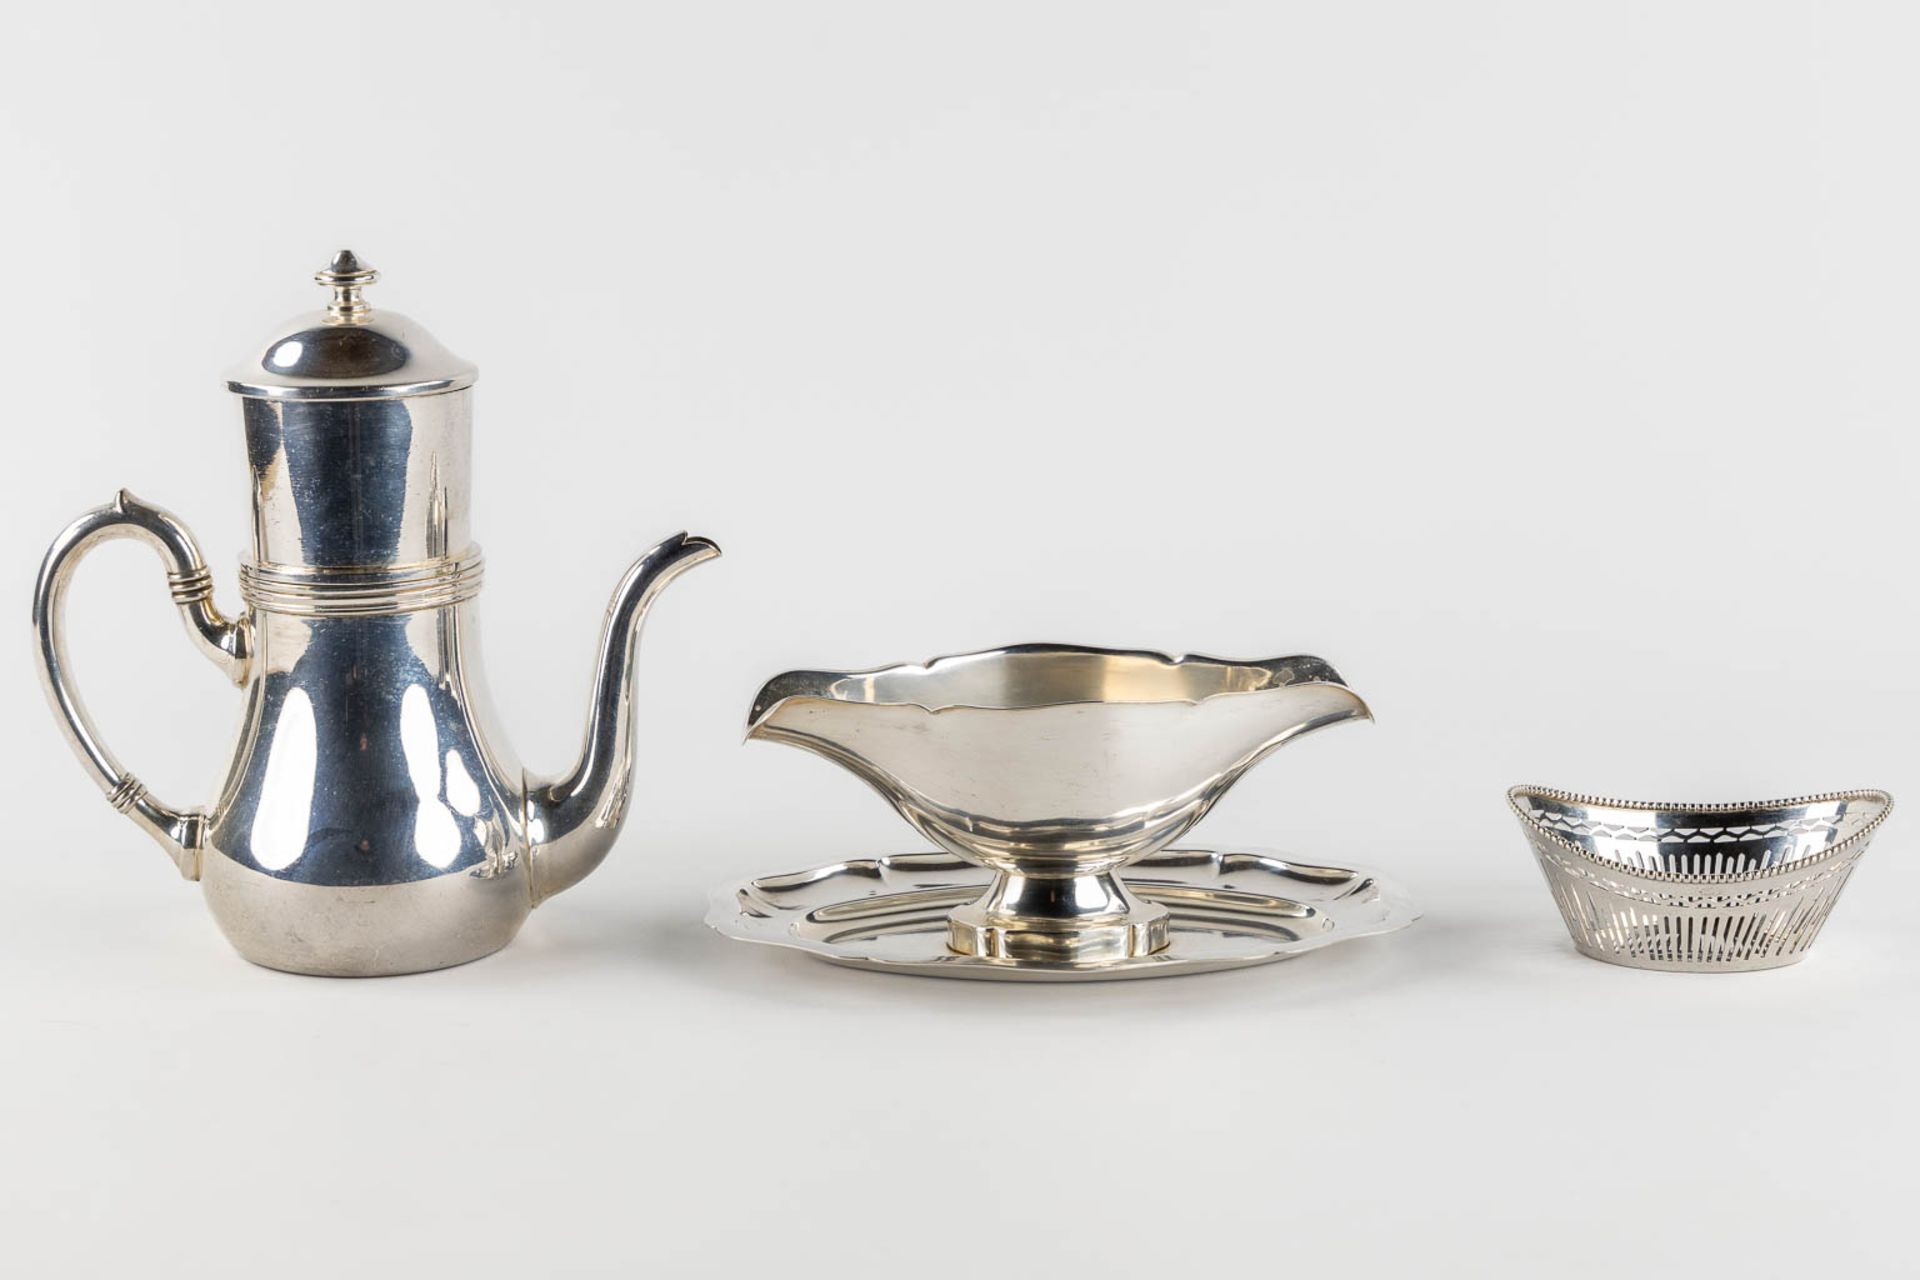 A collection of silver-plated serving accessories, saucer, coffee pot and a basket. (L:32 x W:52 cm) - Image 7 of 14